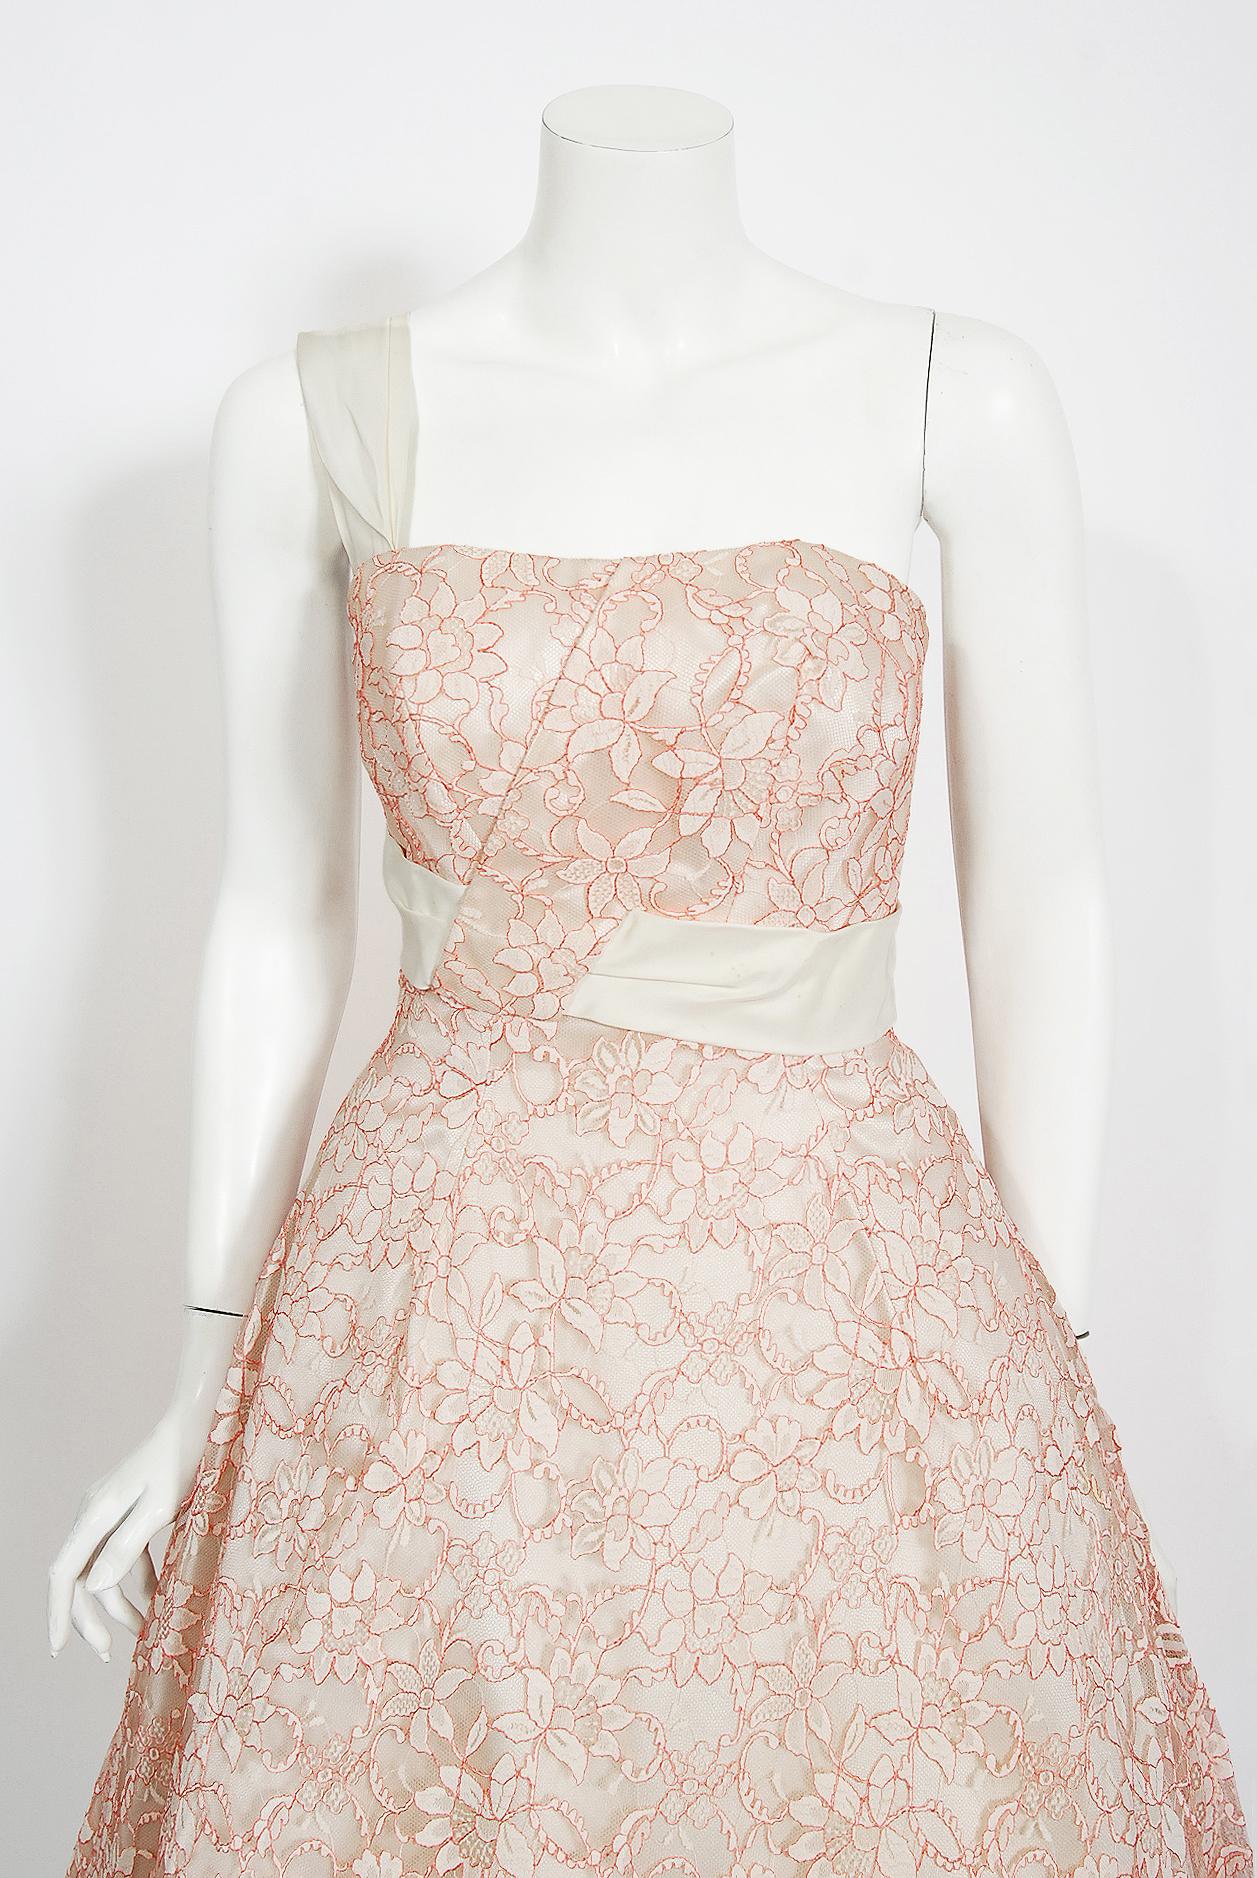 Romantic mid-1950's white and rose-pink sculpted full skirted party dress by a great French couturier, Jacques Heim. The entire garment is fashioned from the highest quality floral pattern Chantilly-lace. The interior, complete with corset boning